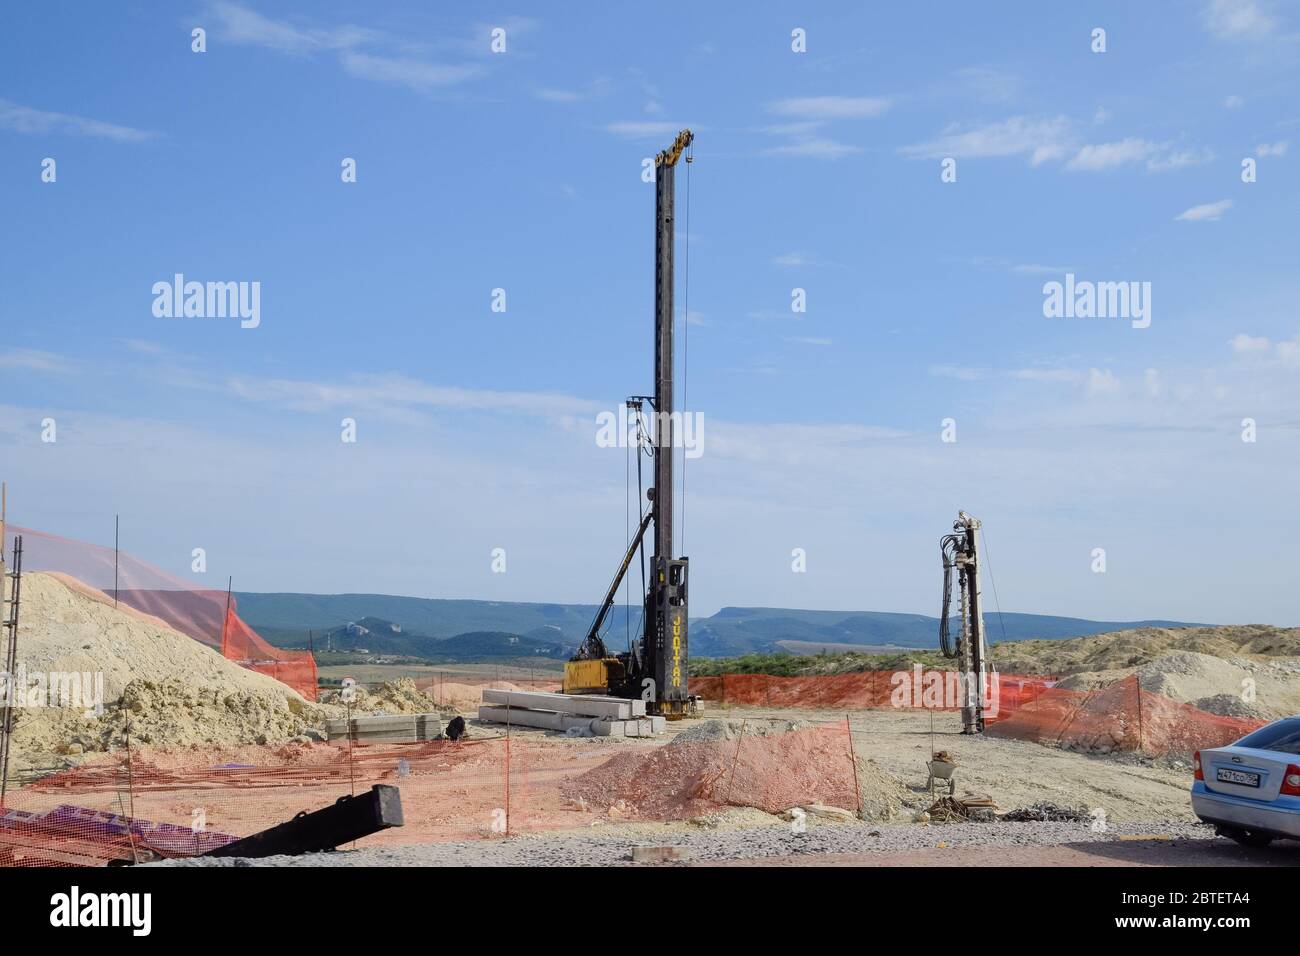 Construction of a new road and transport interchange. Work on reinforced concrete structures and road surface. Stock Photo